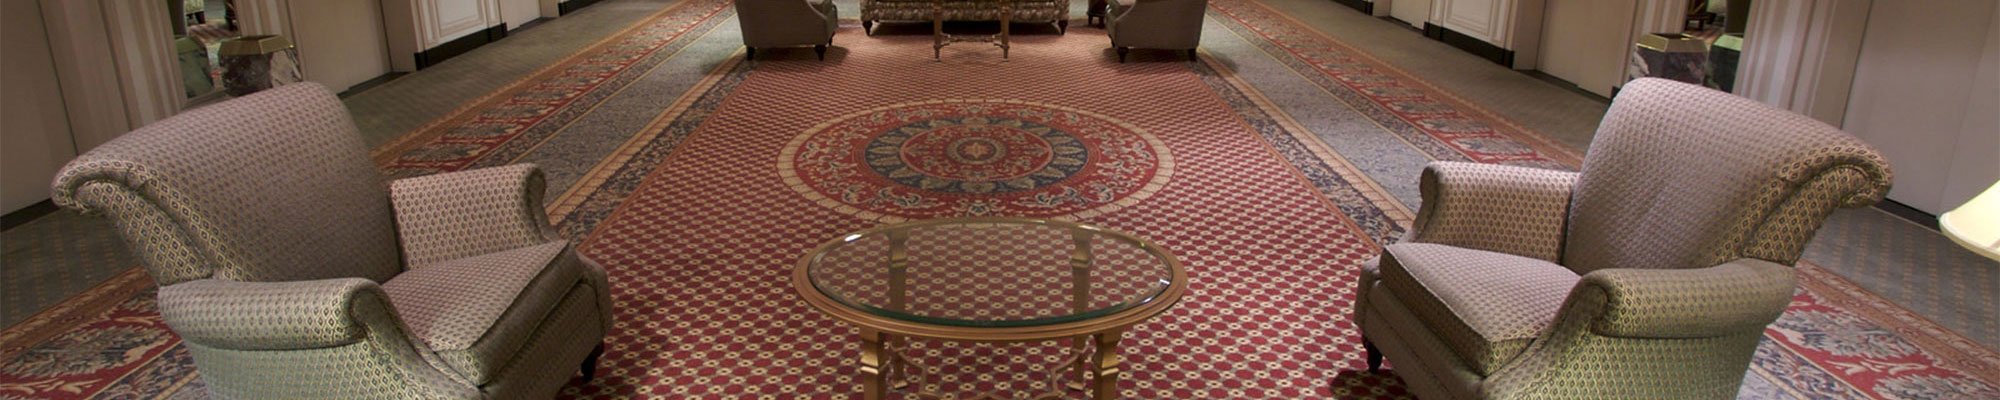 Flooring Services from Popular Carpet Floor Covering in New York City